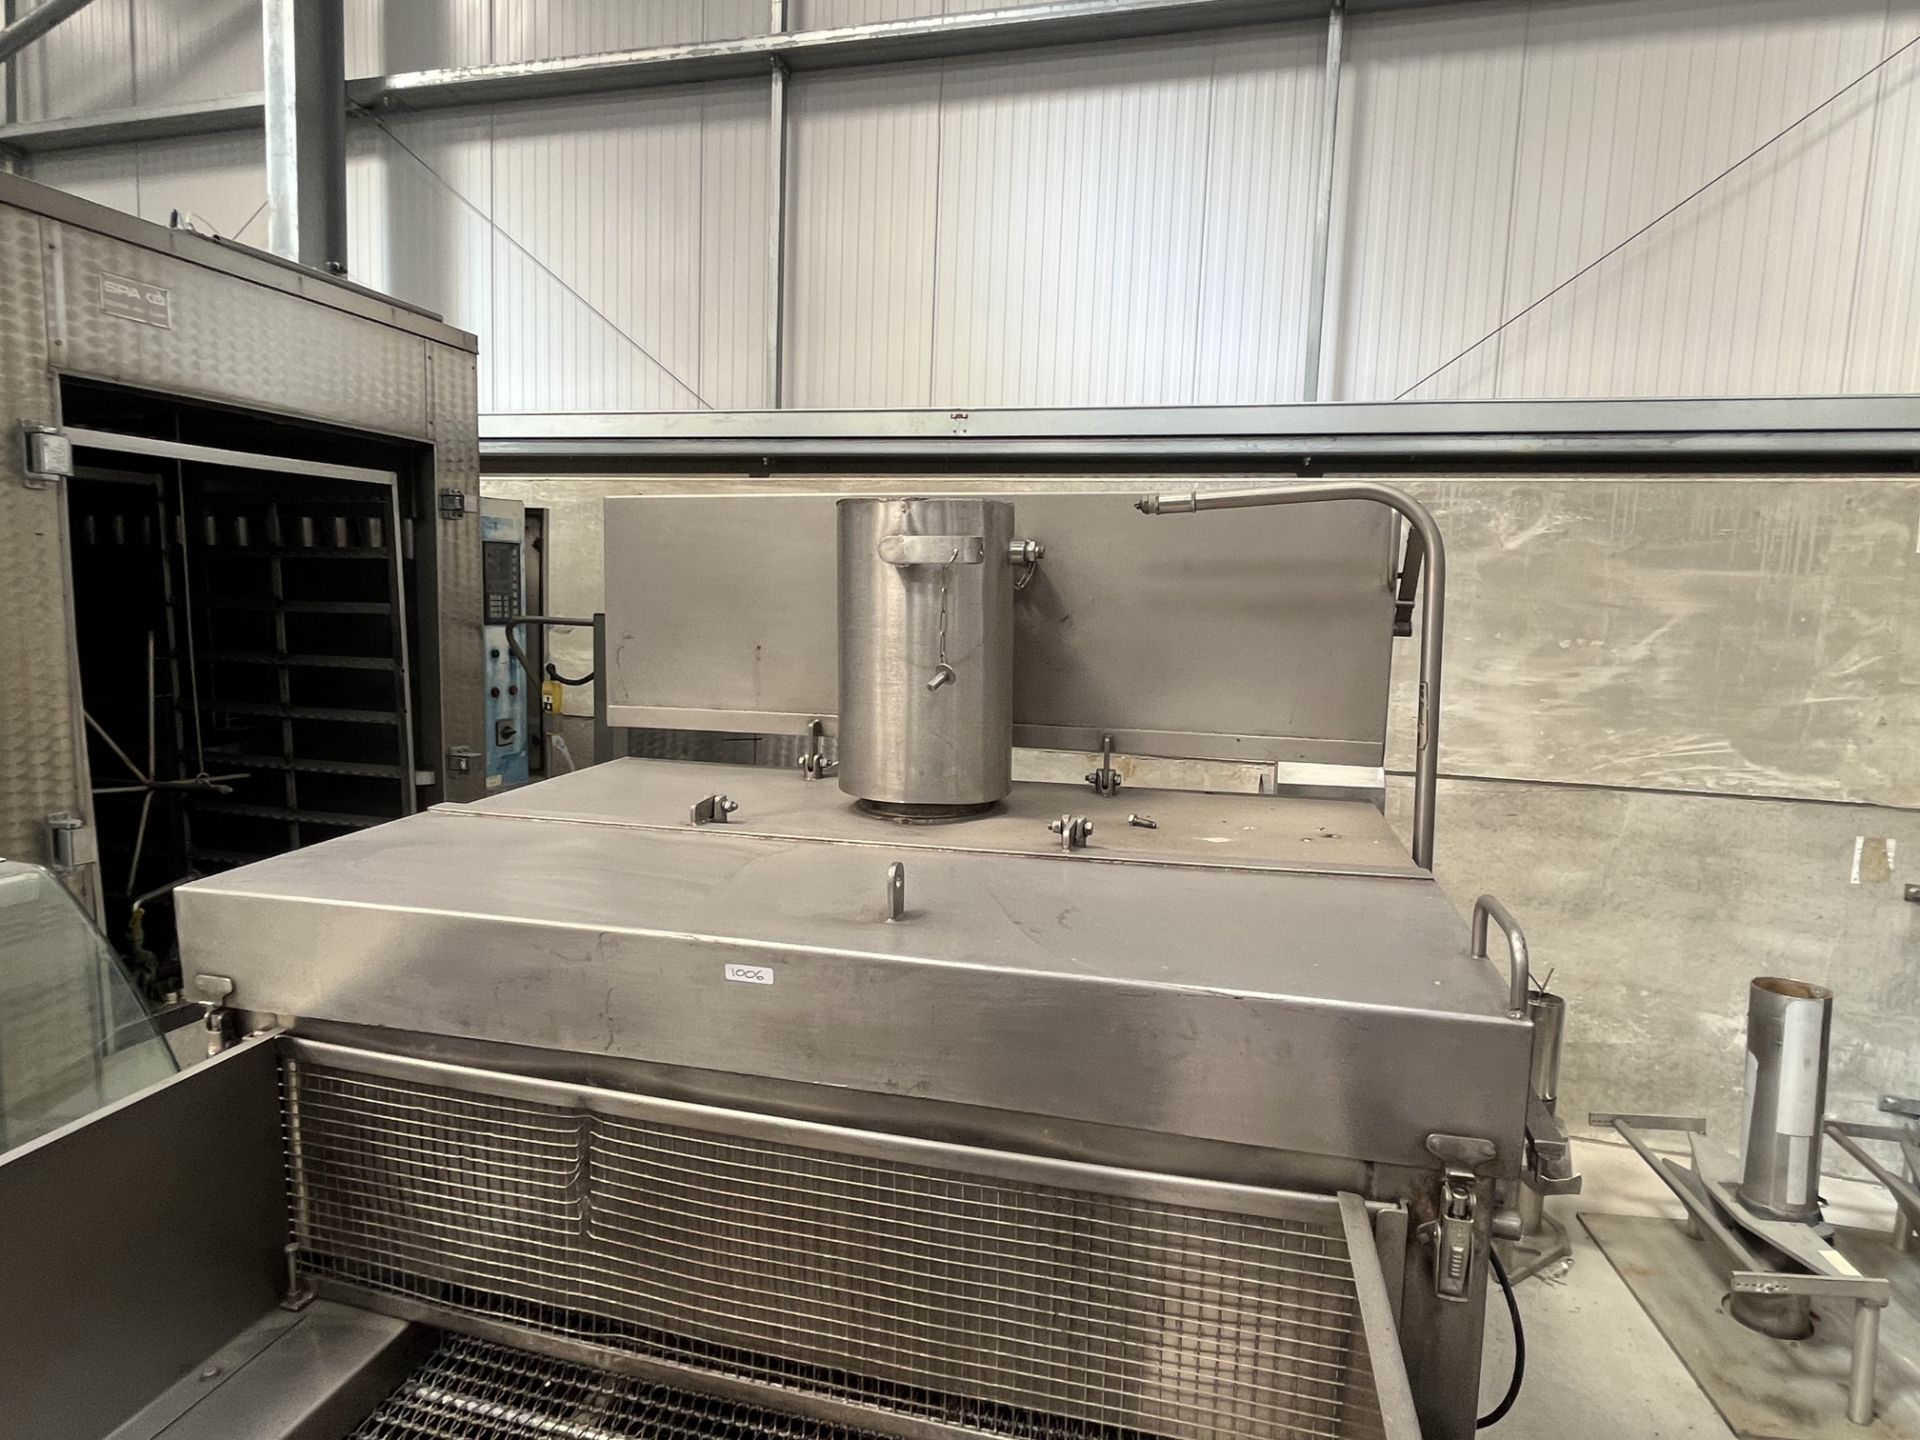 H+C INLINE TOP + BOTTOM GAS OVEN  3 PHASE POWER  600mm WIDE WIRE CONVEYER  HEIGHT - approx - - Image 3 of 11